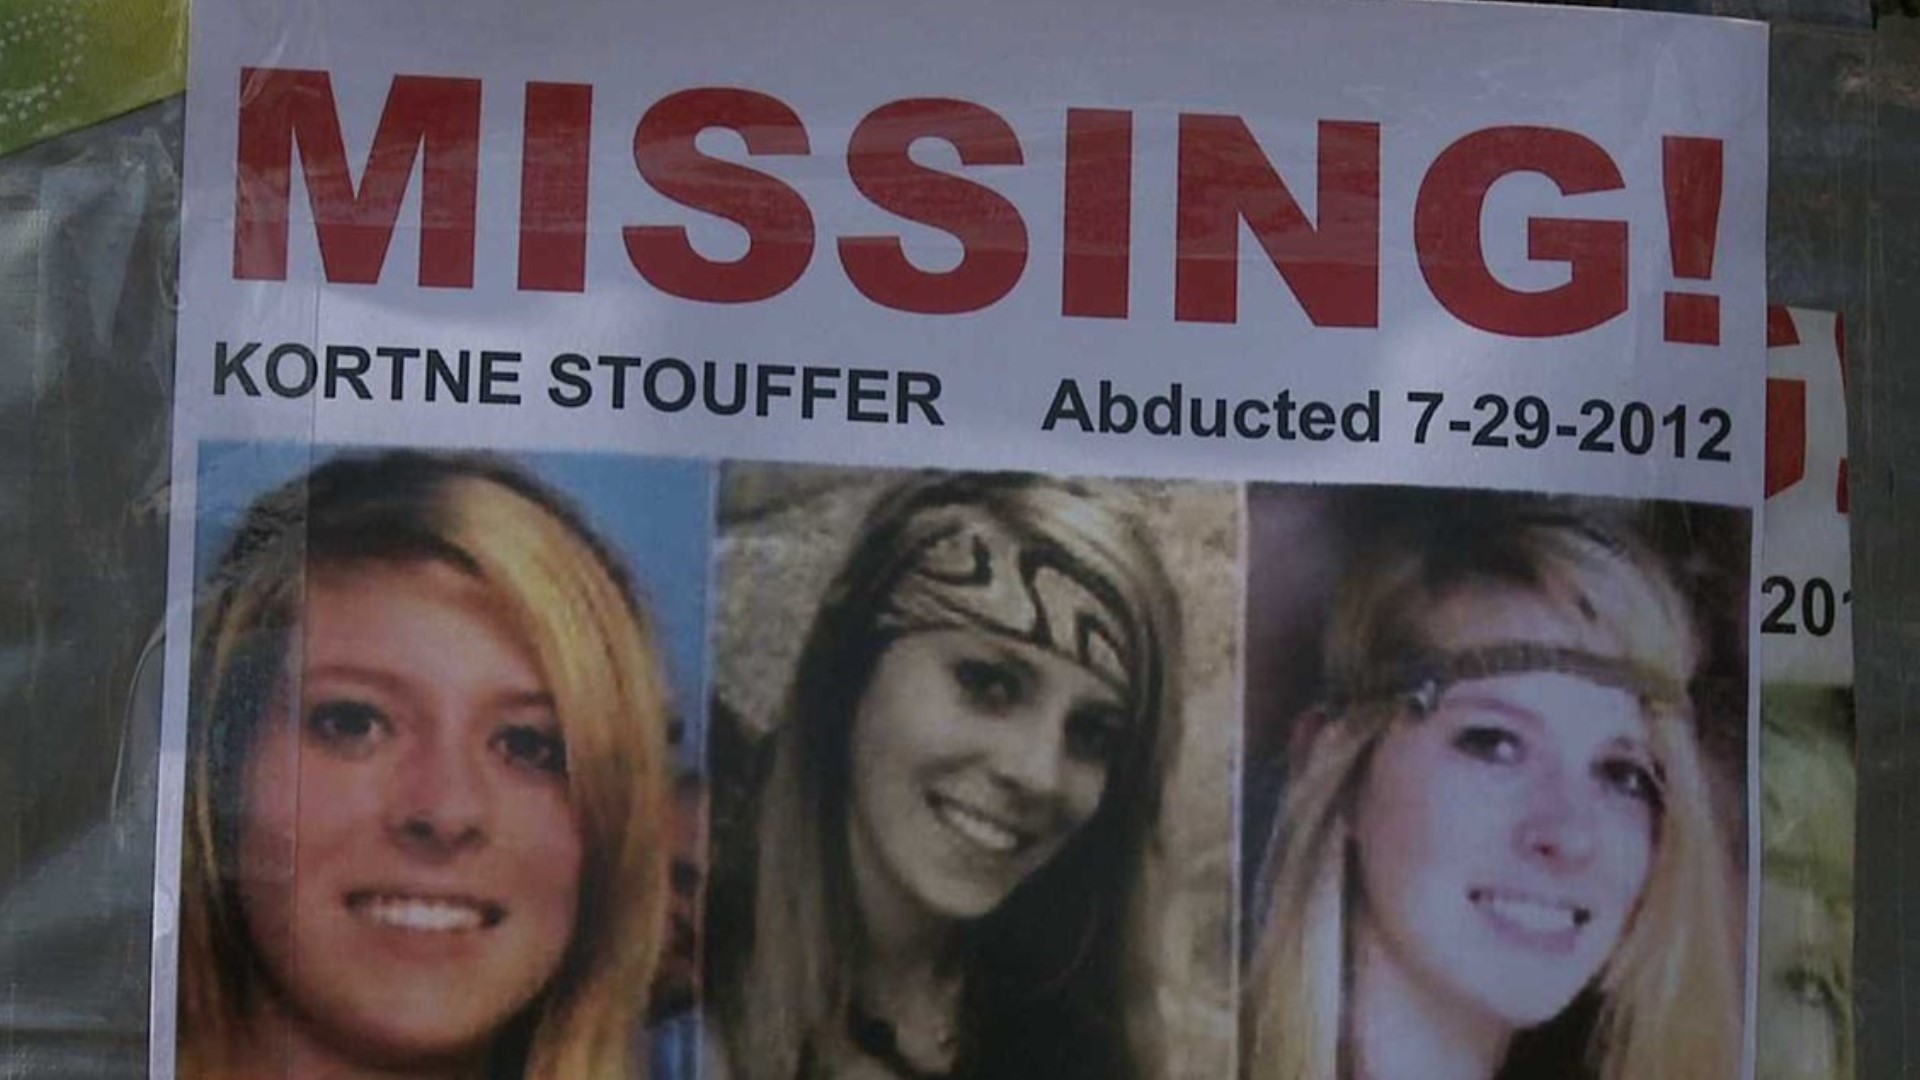 It’s been 11 years since the disappearance of 21-year-old Kortne Stouffer. Friends, family and loved ones are still looking for answers and asking for public help.